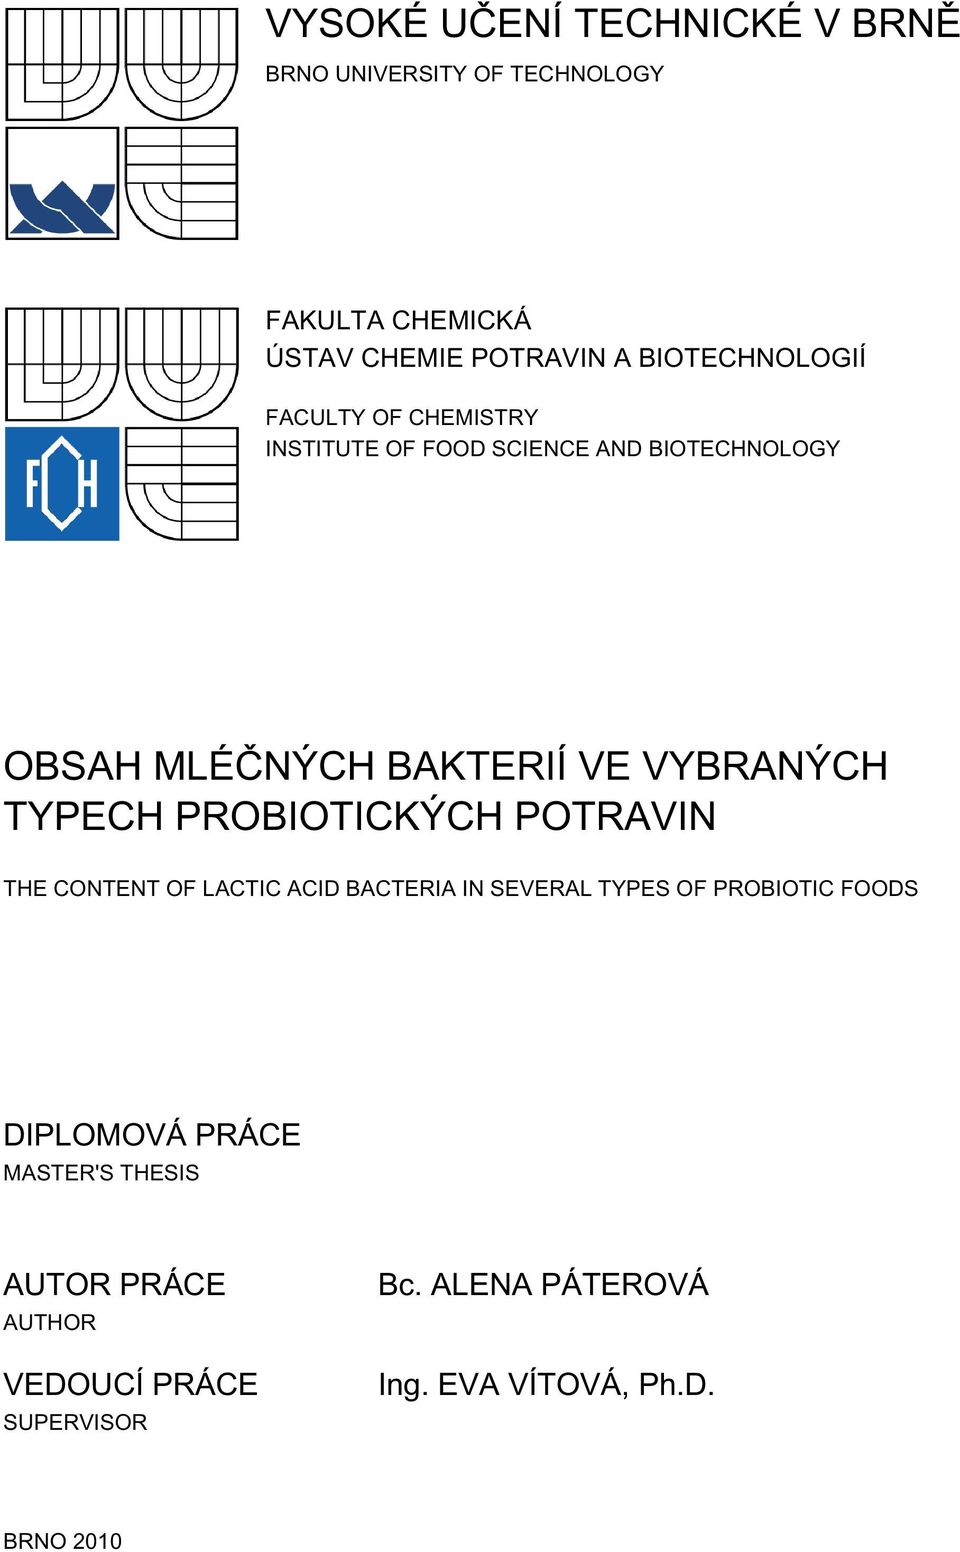 VYBRANÝCH TYPECH PROBIOTICKÝCH POTRAVIN THE CONTENT OF LACTIC ACID BACTERIA IN SEVERAL TYPES OF PROBIOTIC FOODS